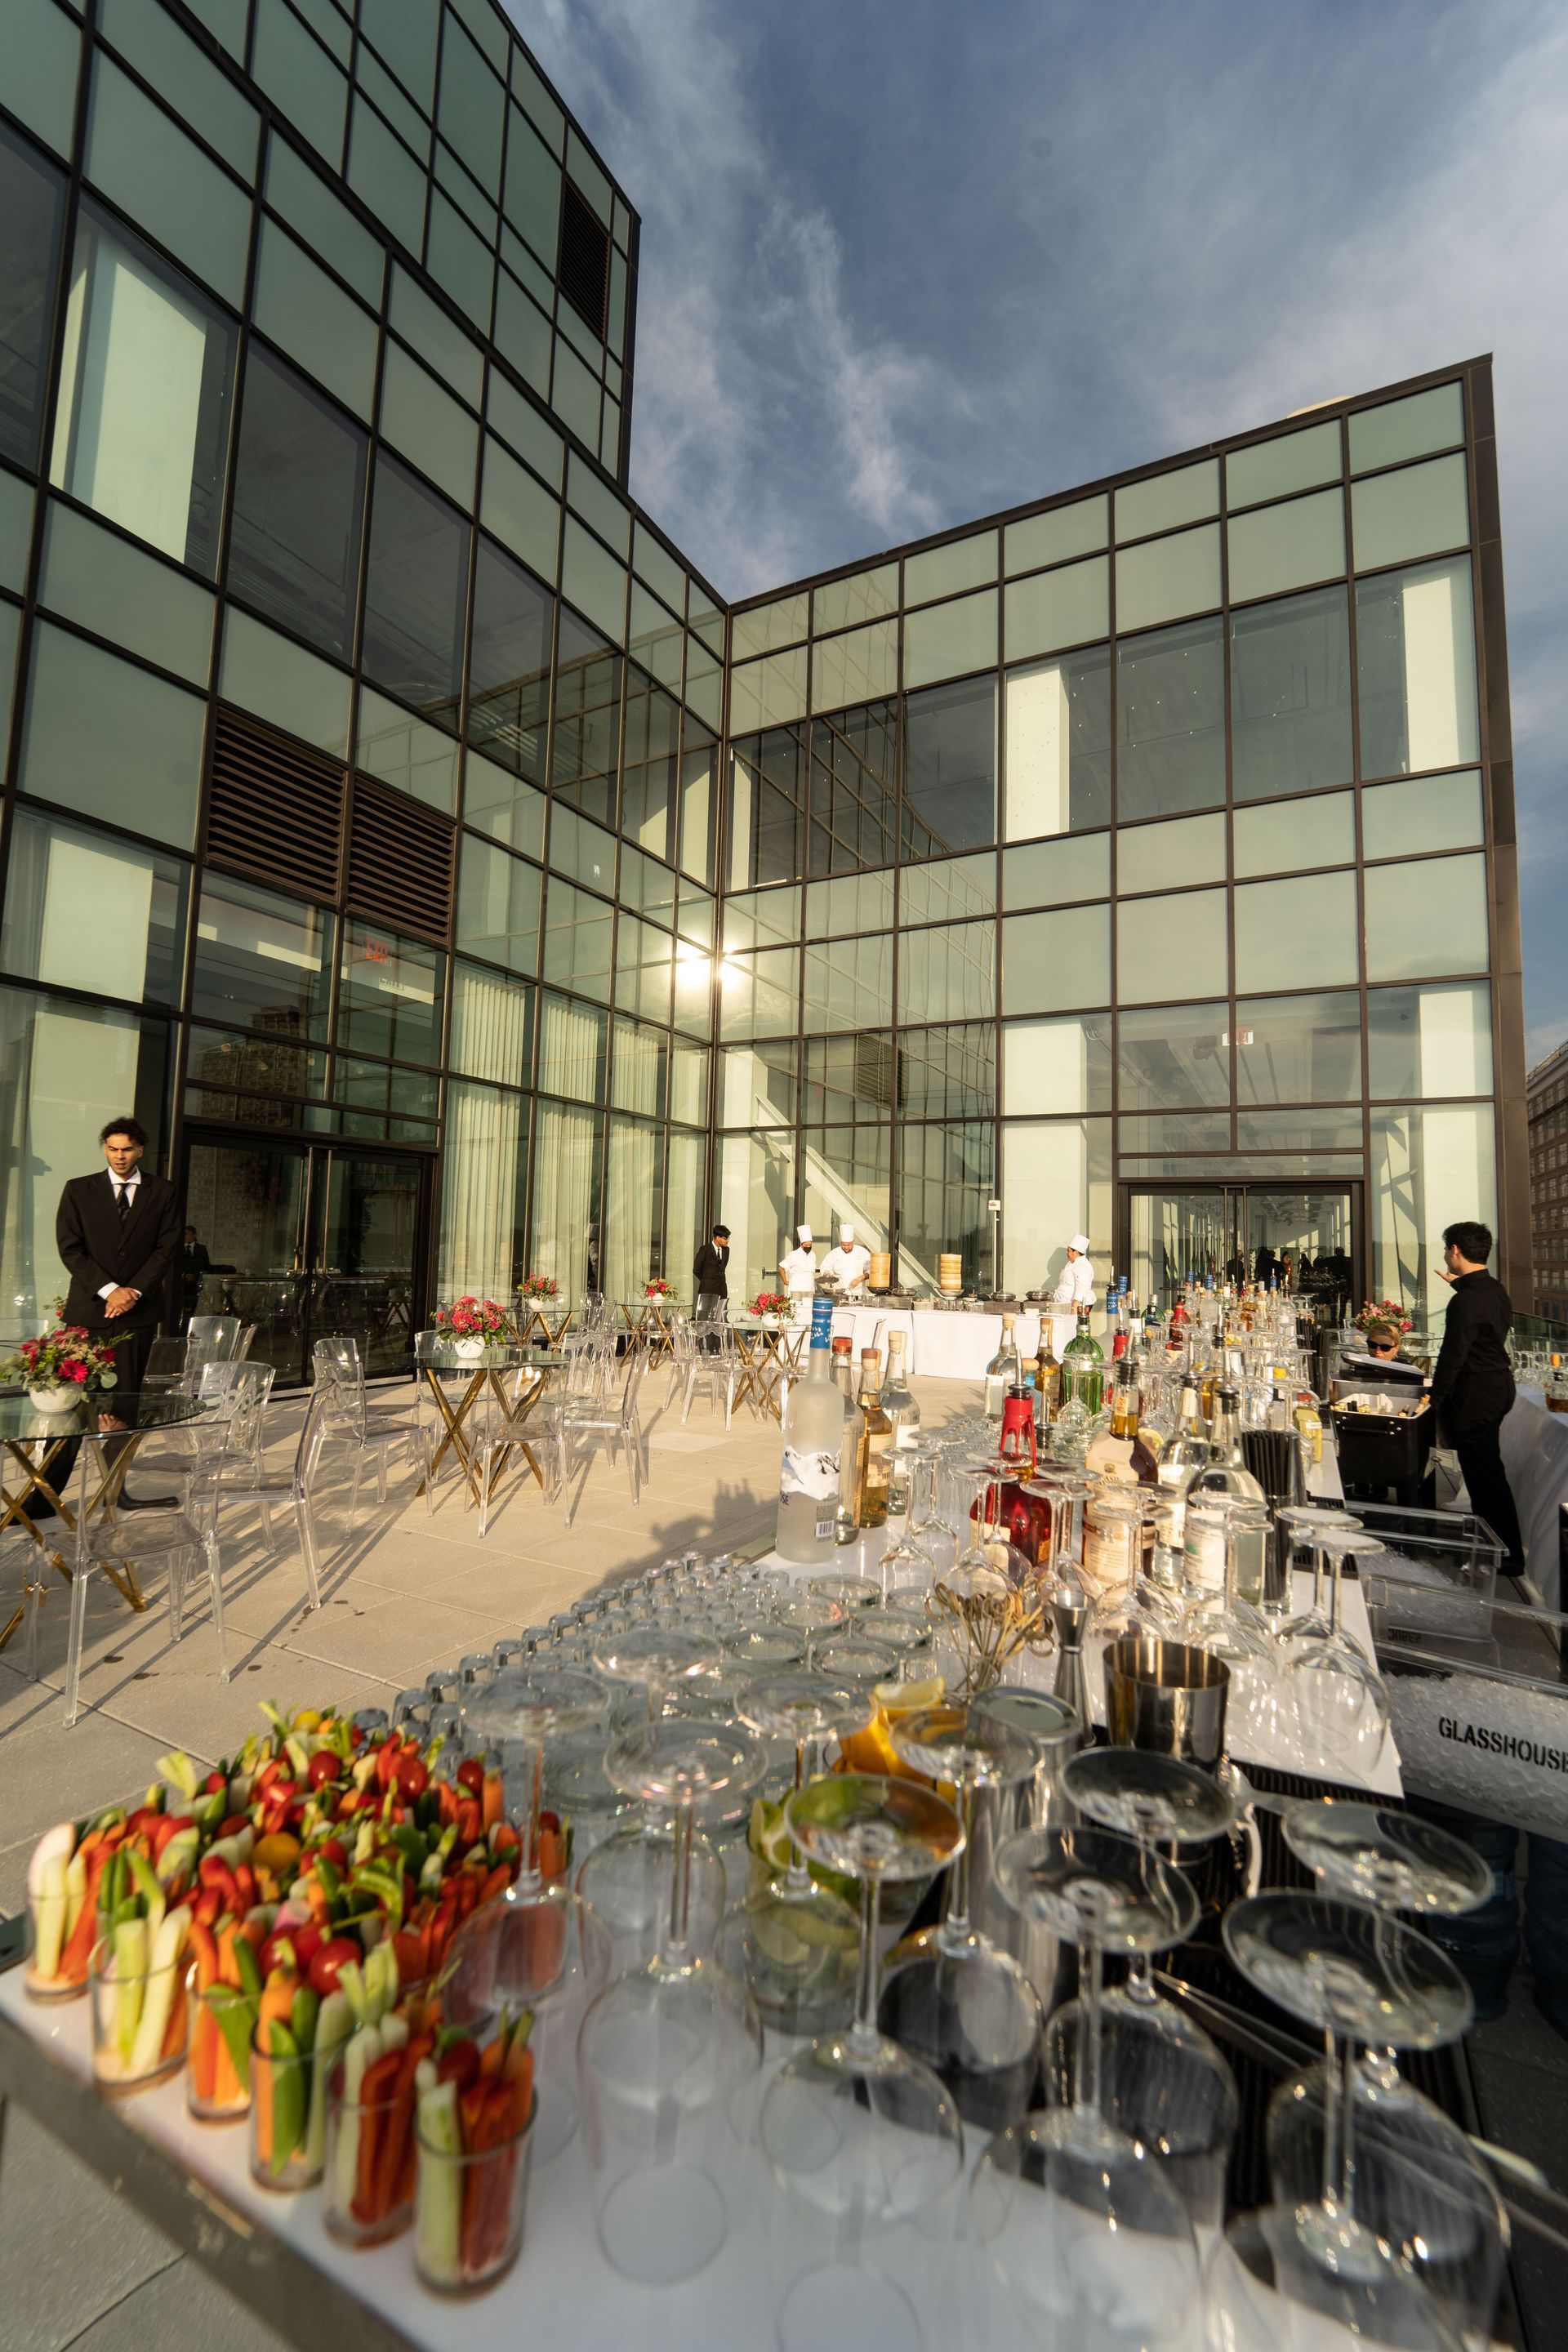 a large building with a lot of windows and a table with food and wine glasses on it